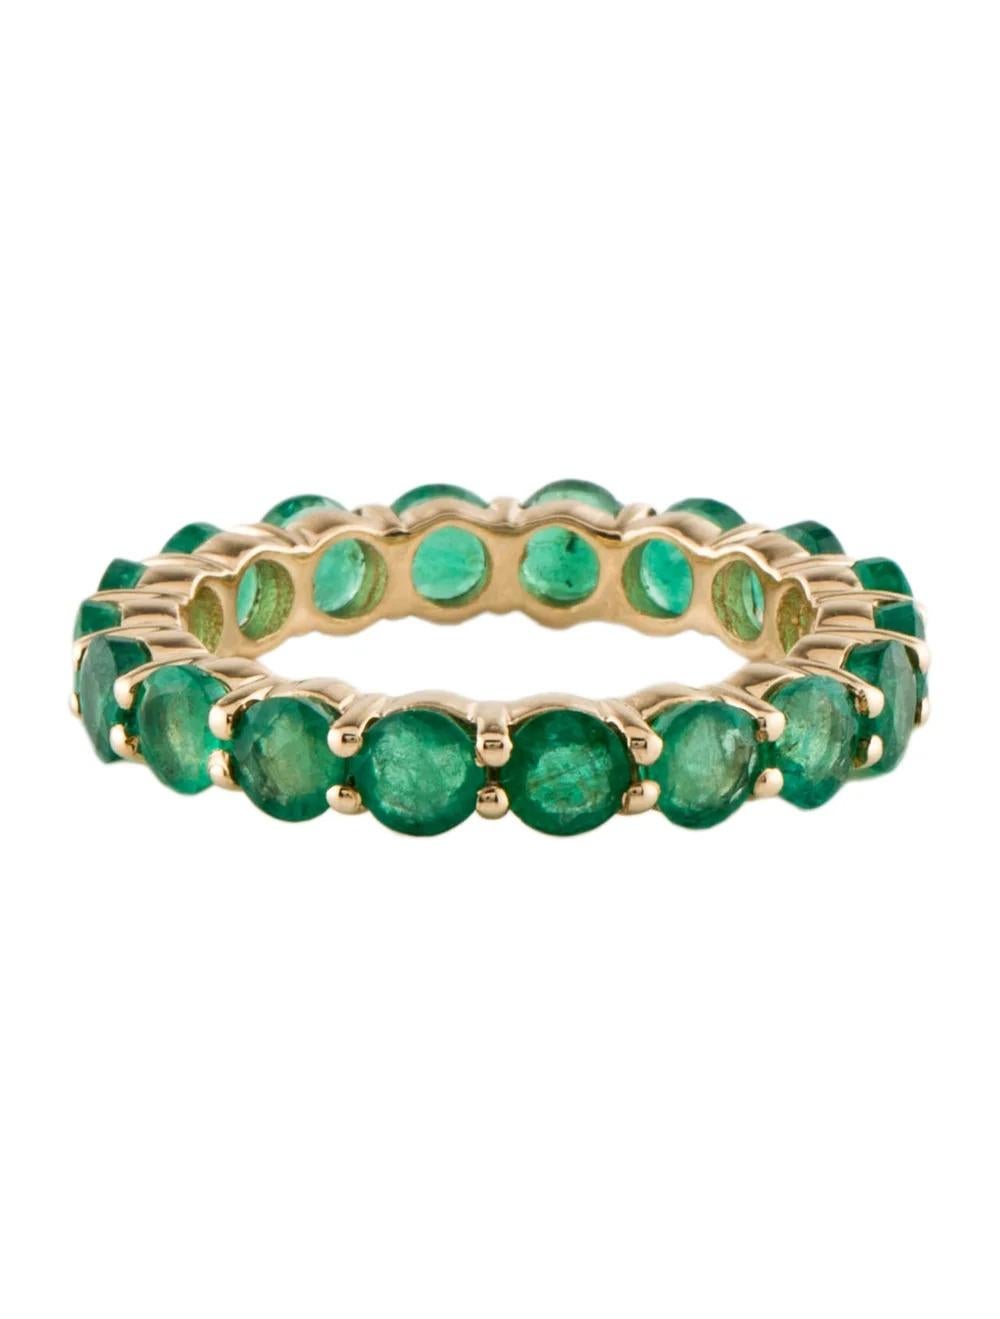 14K Emerald Eternity Band Ring 2.88ctw Green Gemstone - Size 7.75 - Fine Jewelry In New Condition For Sale In Holtsville, NY